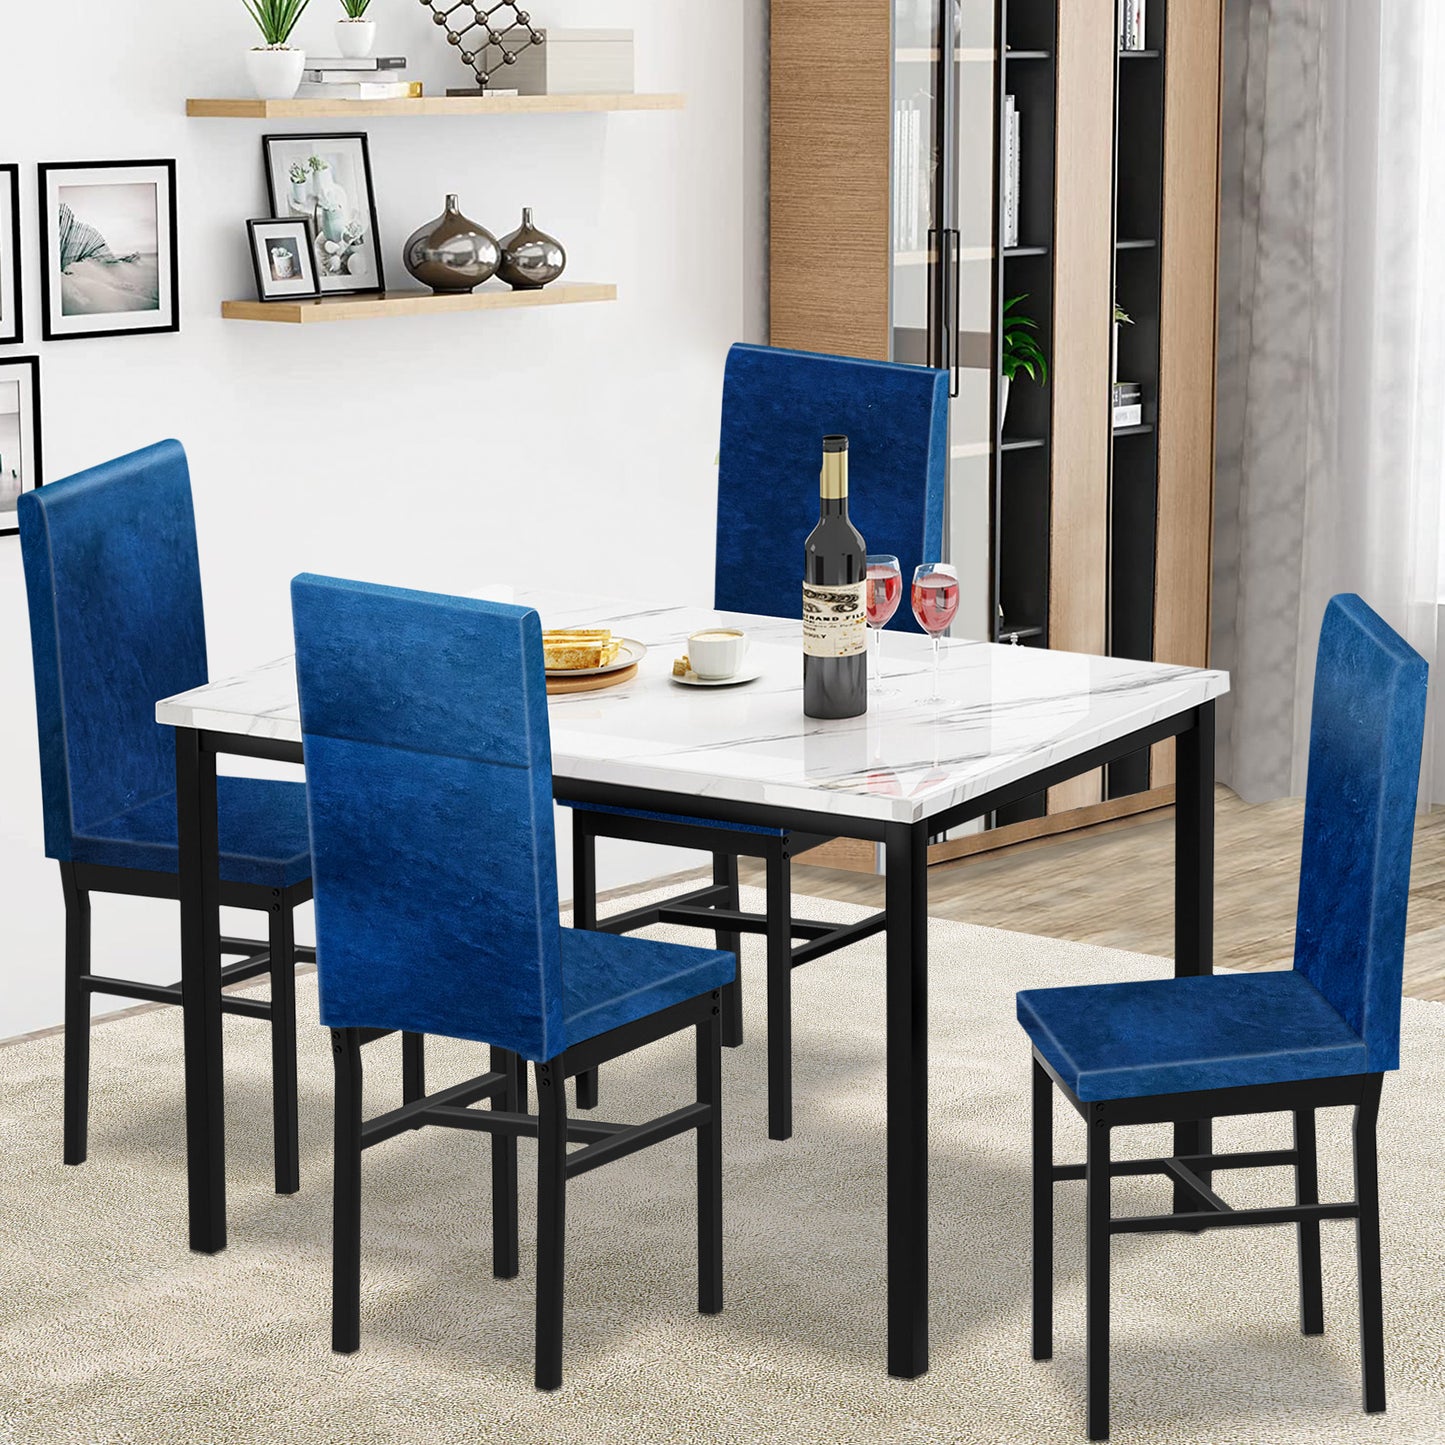 5 Piece Dining Set, Modern Dining Table and Chairs Set for 4, Kitchen Dining Table Set with Faux Marble Tabletop and 4 Velvet Fabric Upholstered Chairs, for Small Space, Breakfast Nook, D8925